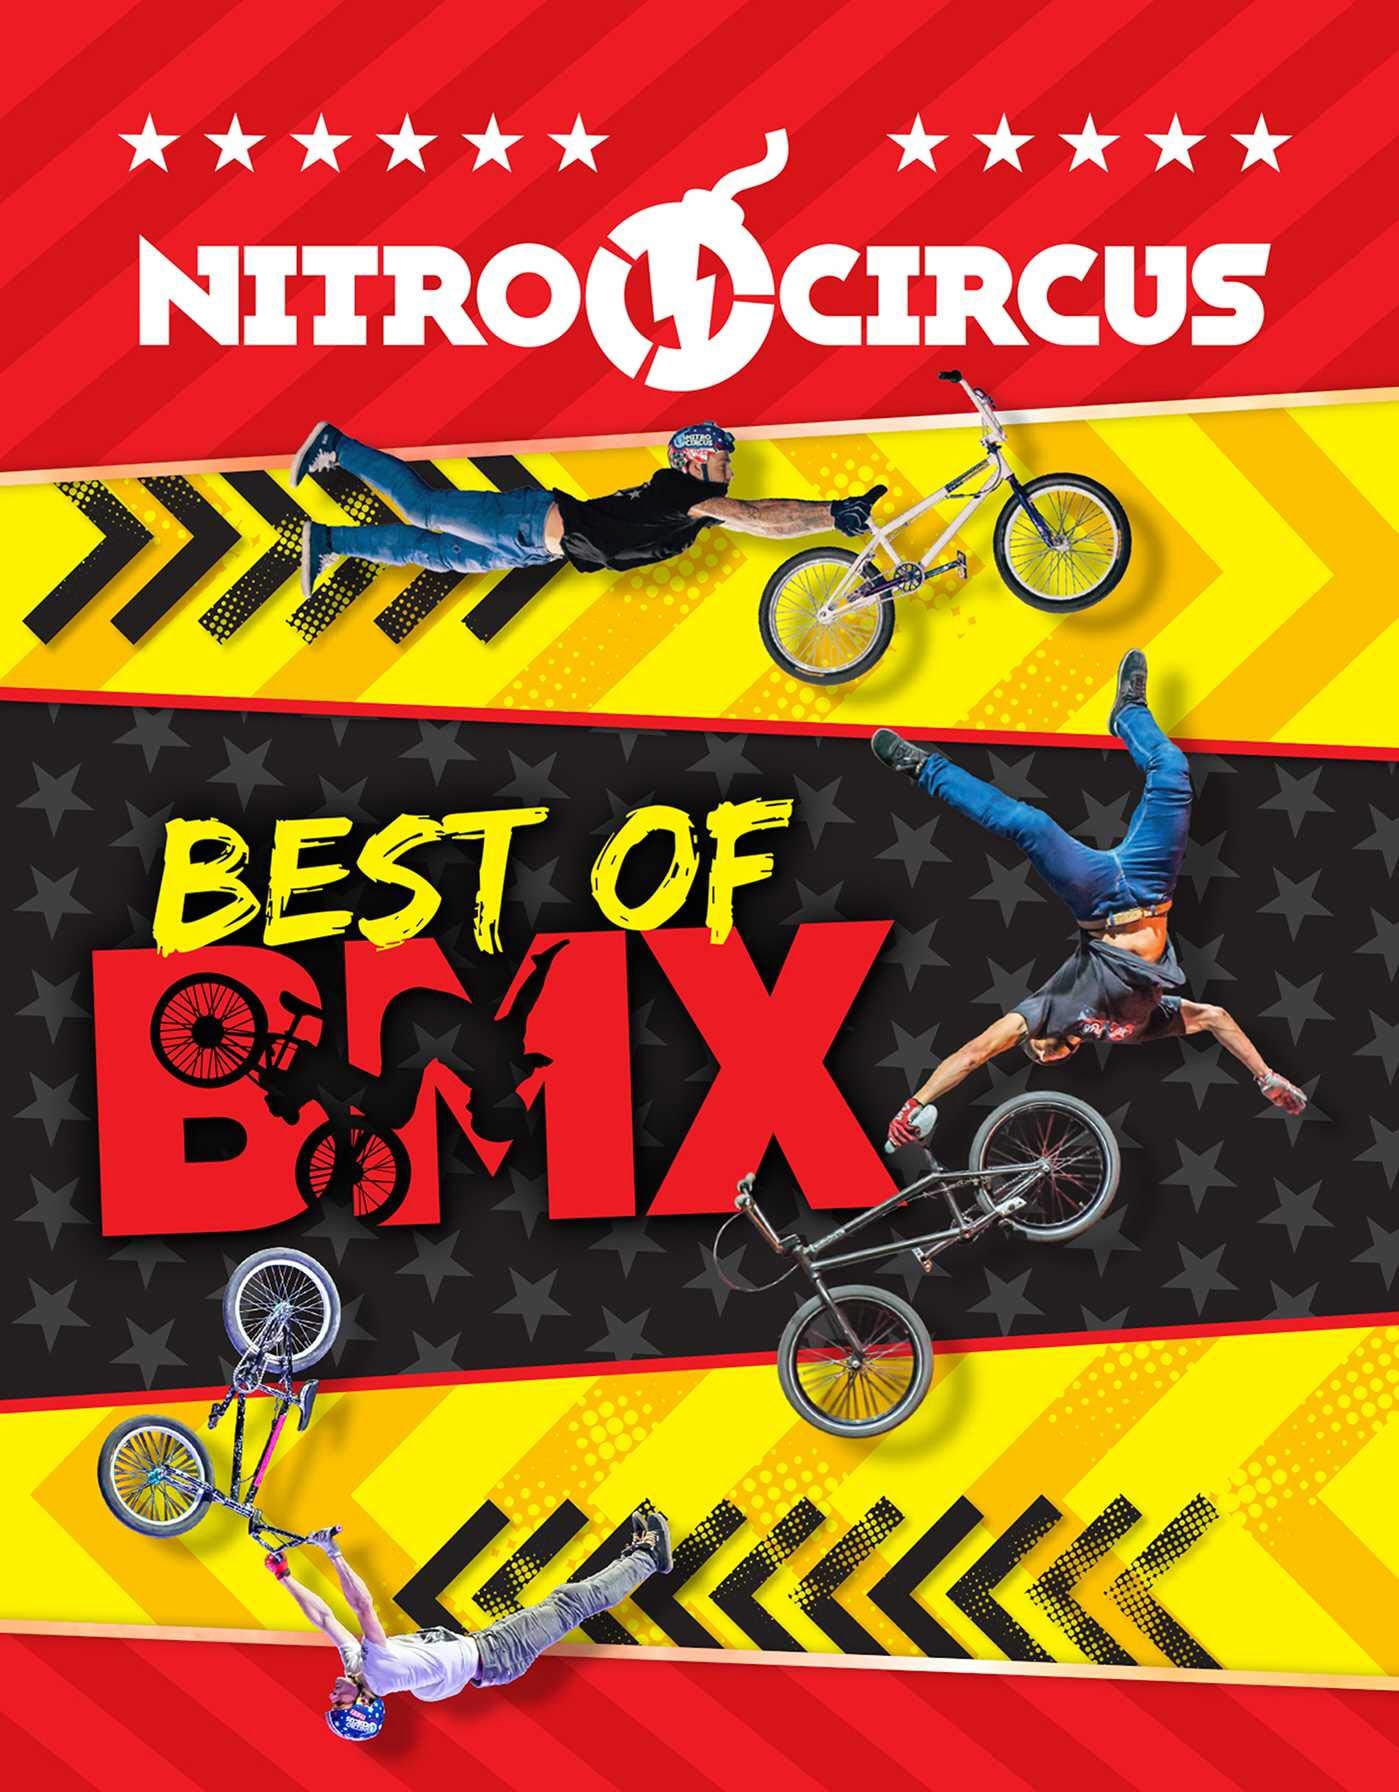 Book “Nitro Circus: Best of BMX” by Ripley — July 25, 2019